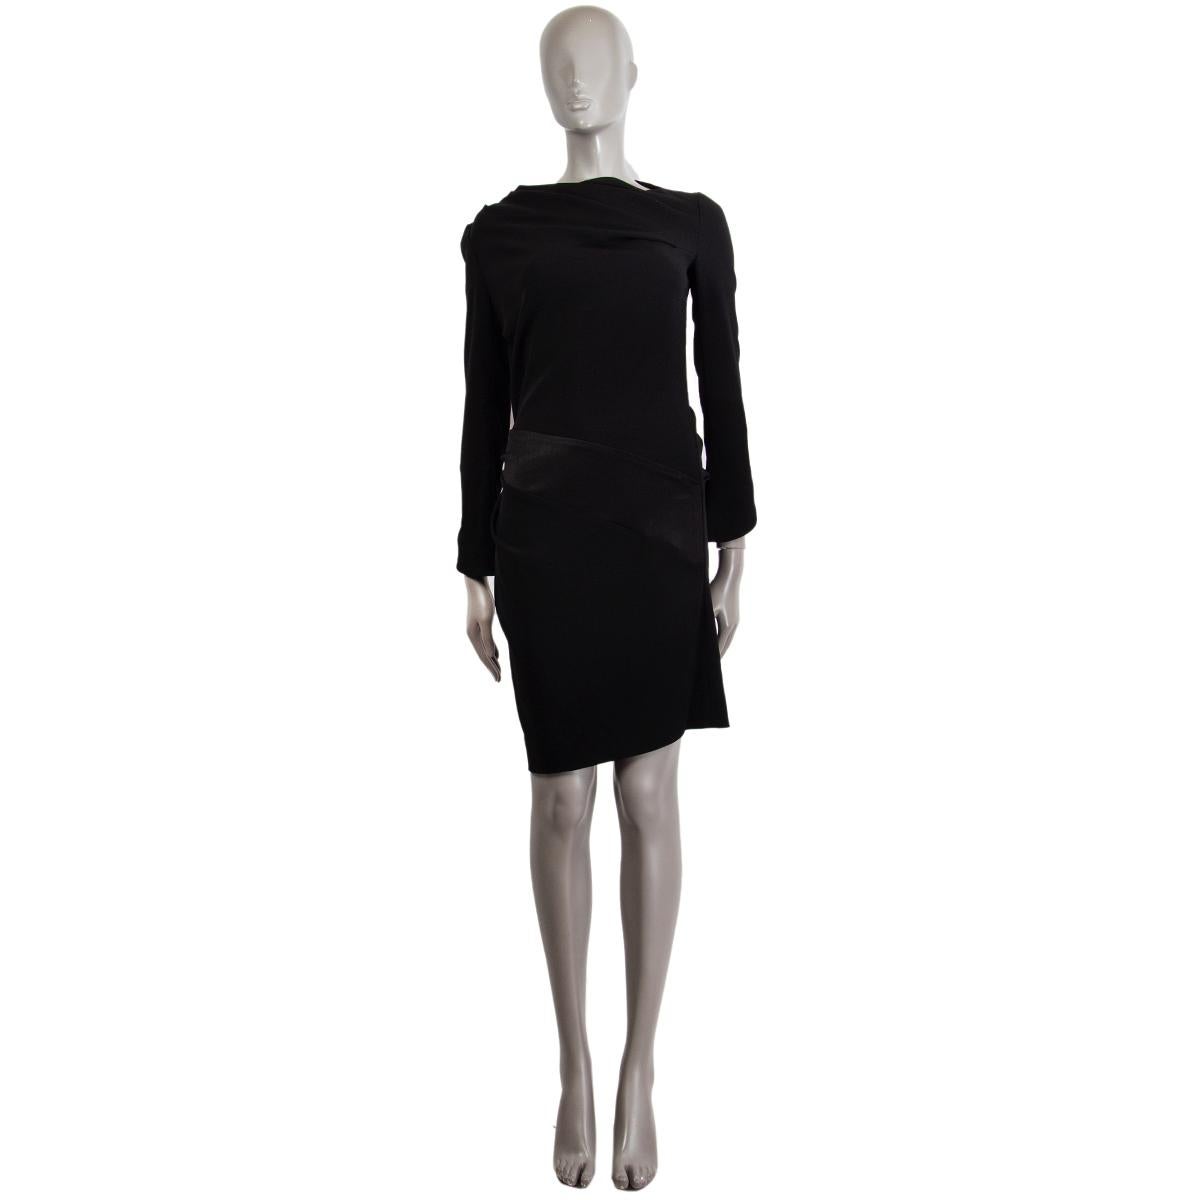 100% authentic Balenciaga long sleeve sheath dress in black triacetate (80%) and polyester (20%) with a draped jewel neckline. Has a diagonal triacetate panel detail around the waist. Closes on the side with a zipper. Unlined. Has been worn and is